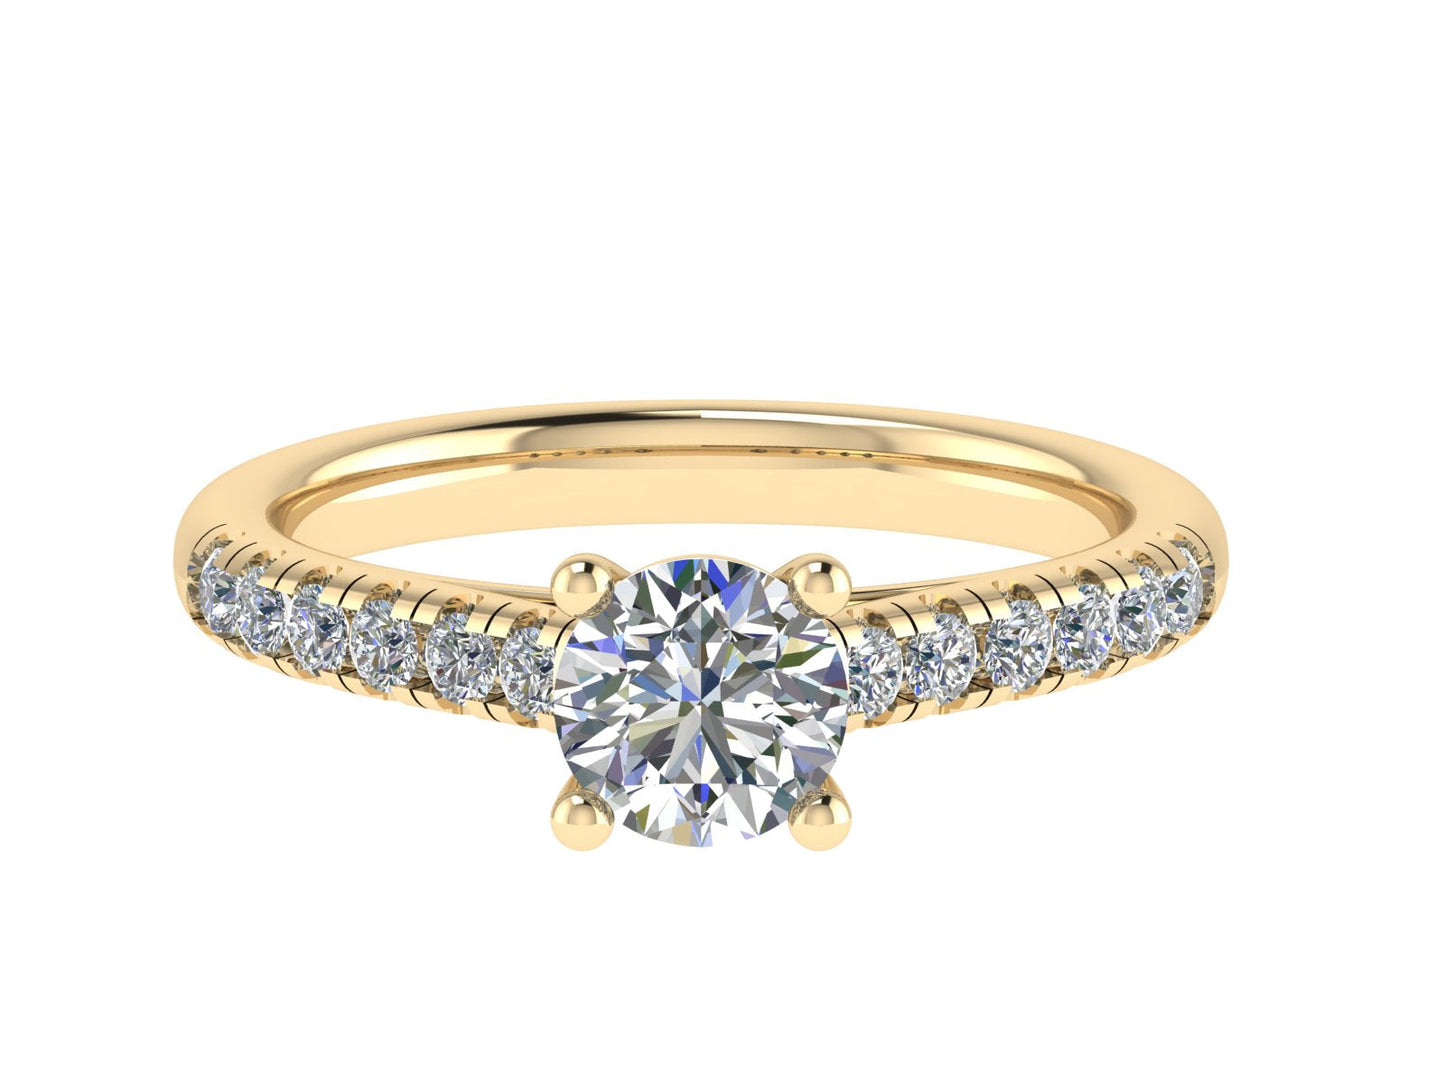 Round Ring with Diamond set shoulders 5mm